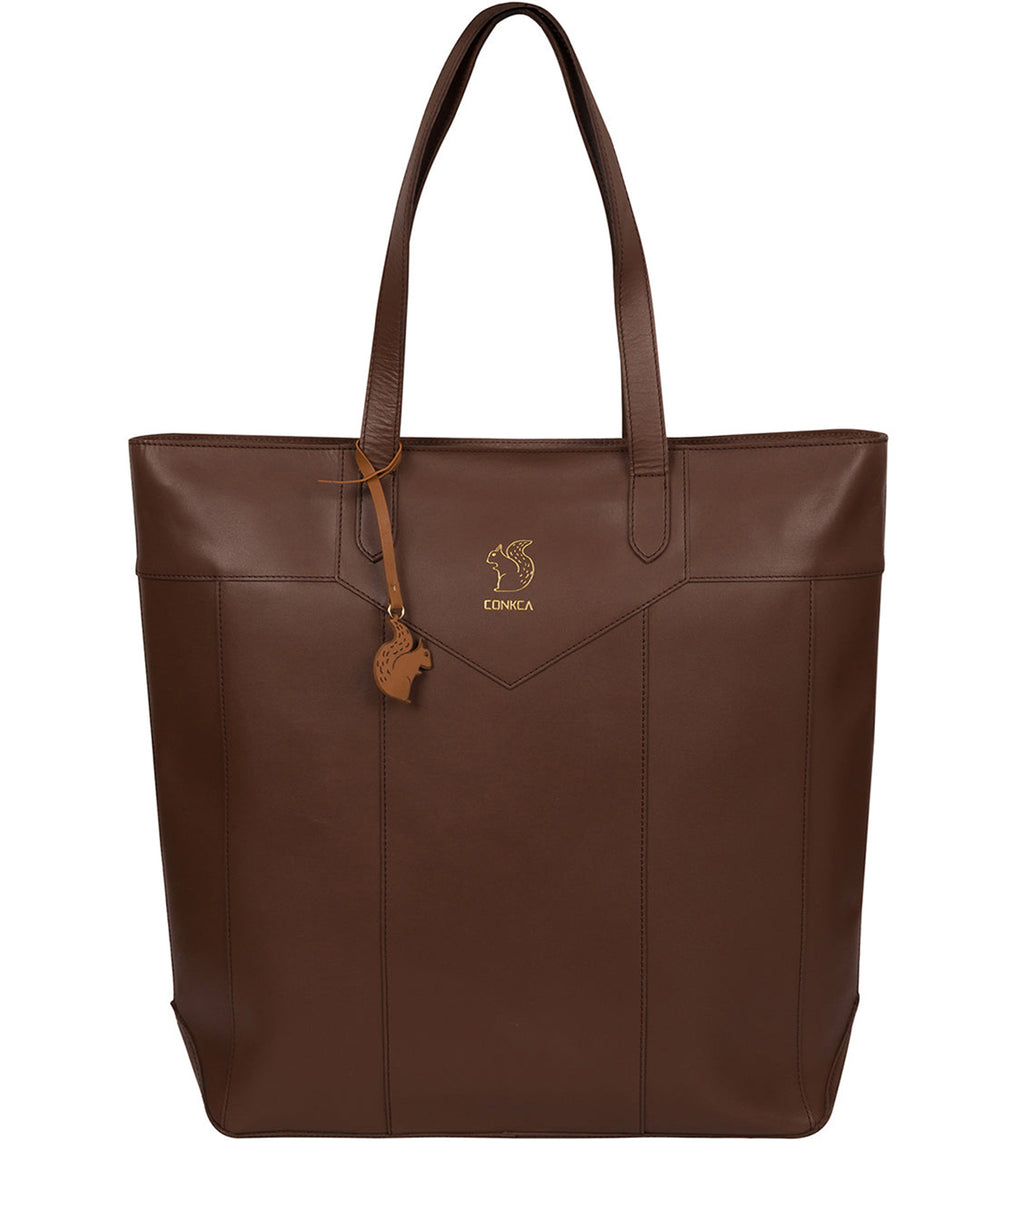 Chestnut Leather Tote Bag 'Eliza' by Conkca London – Pure Luxuries London